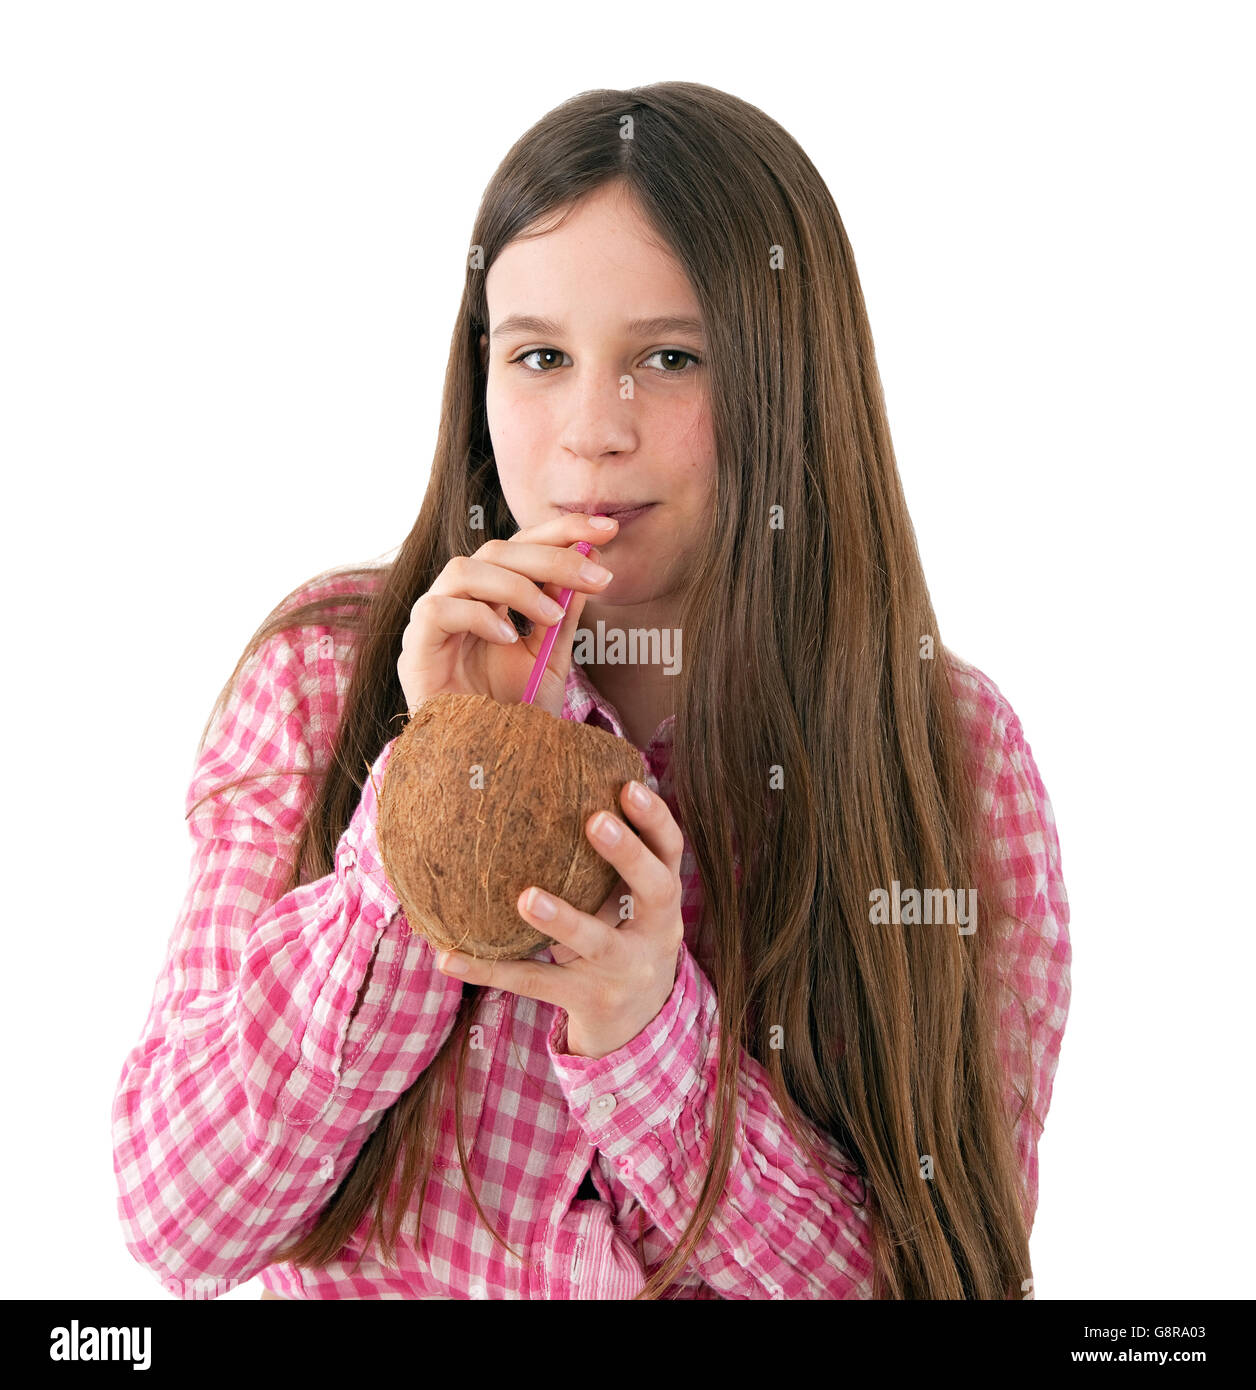 young girl drinking from a coconut Stock Photo